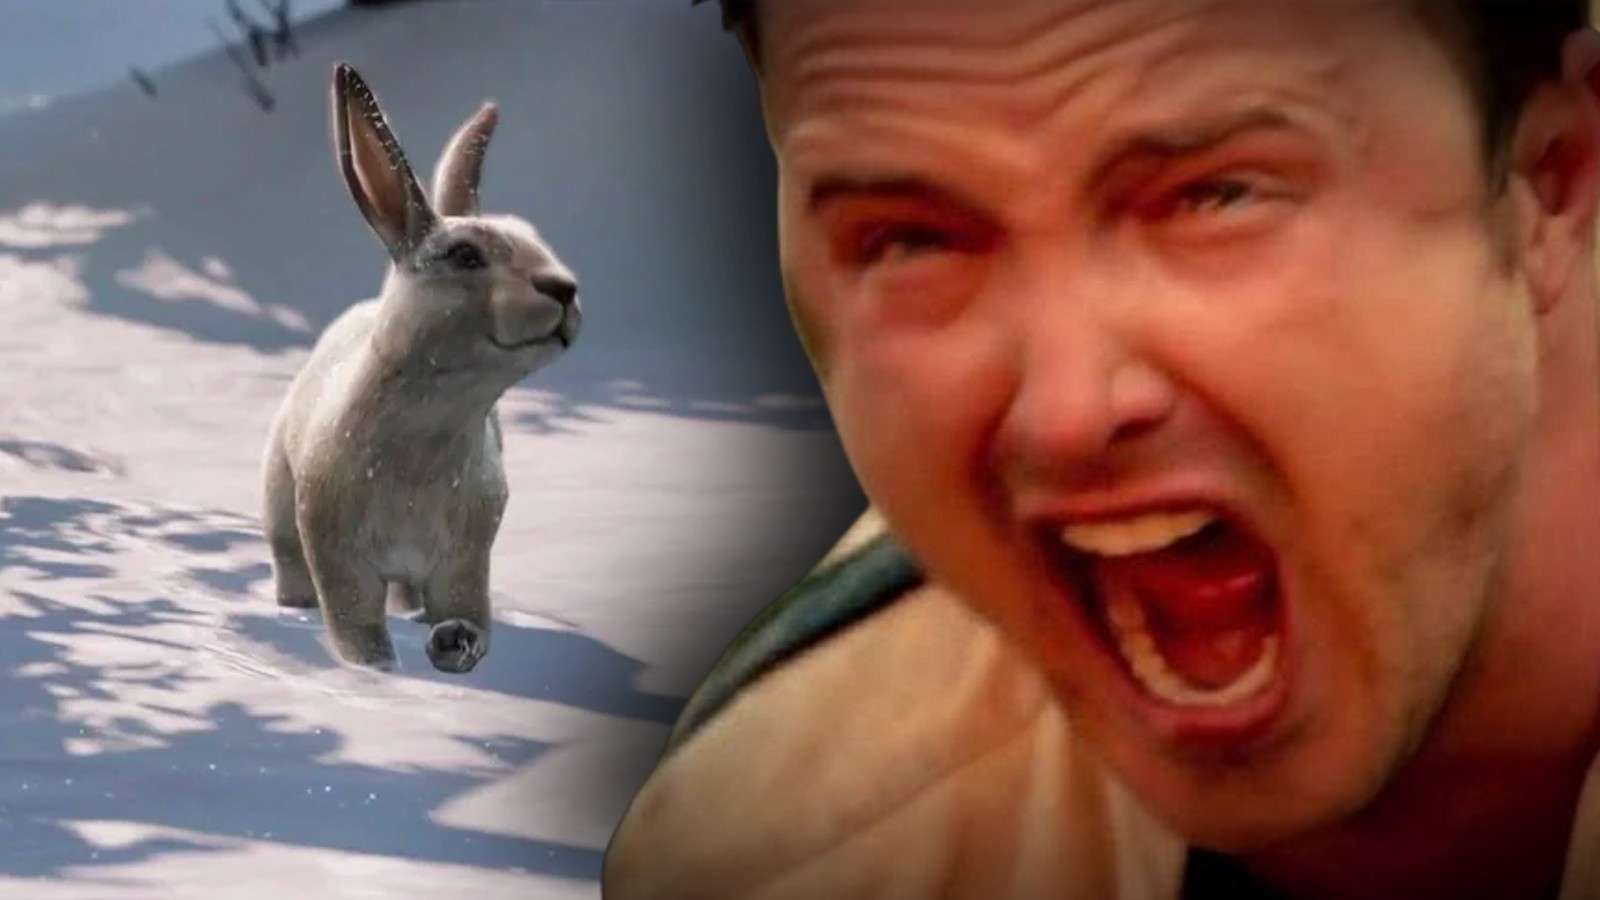 The rabbit meme scene from The Last of Us and Aaron Paul screaming